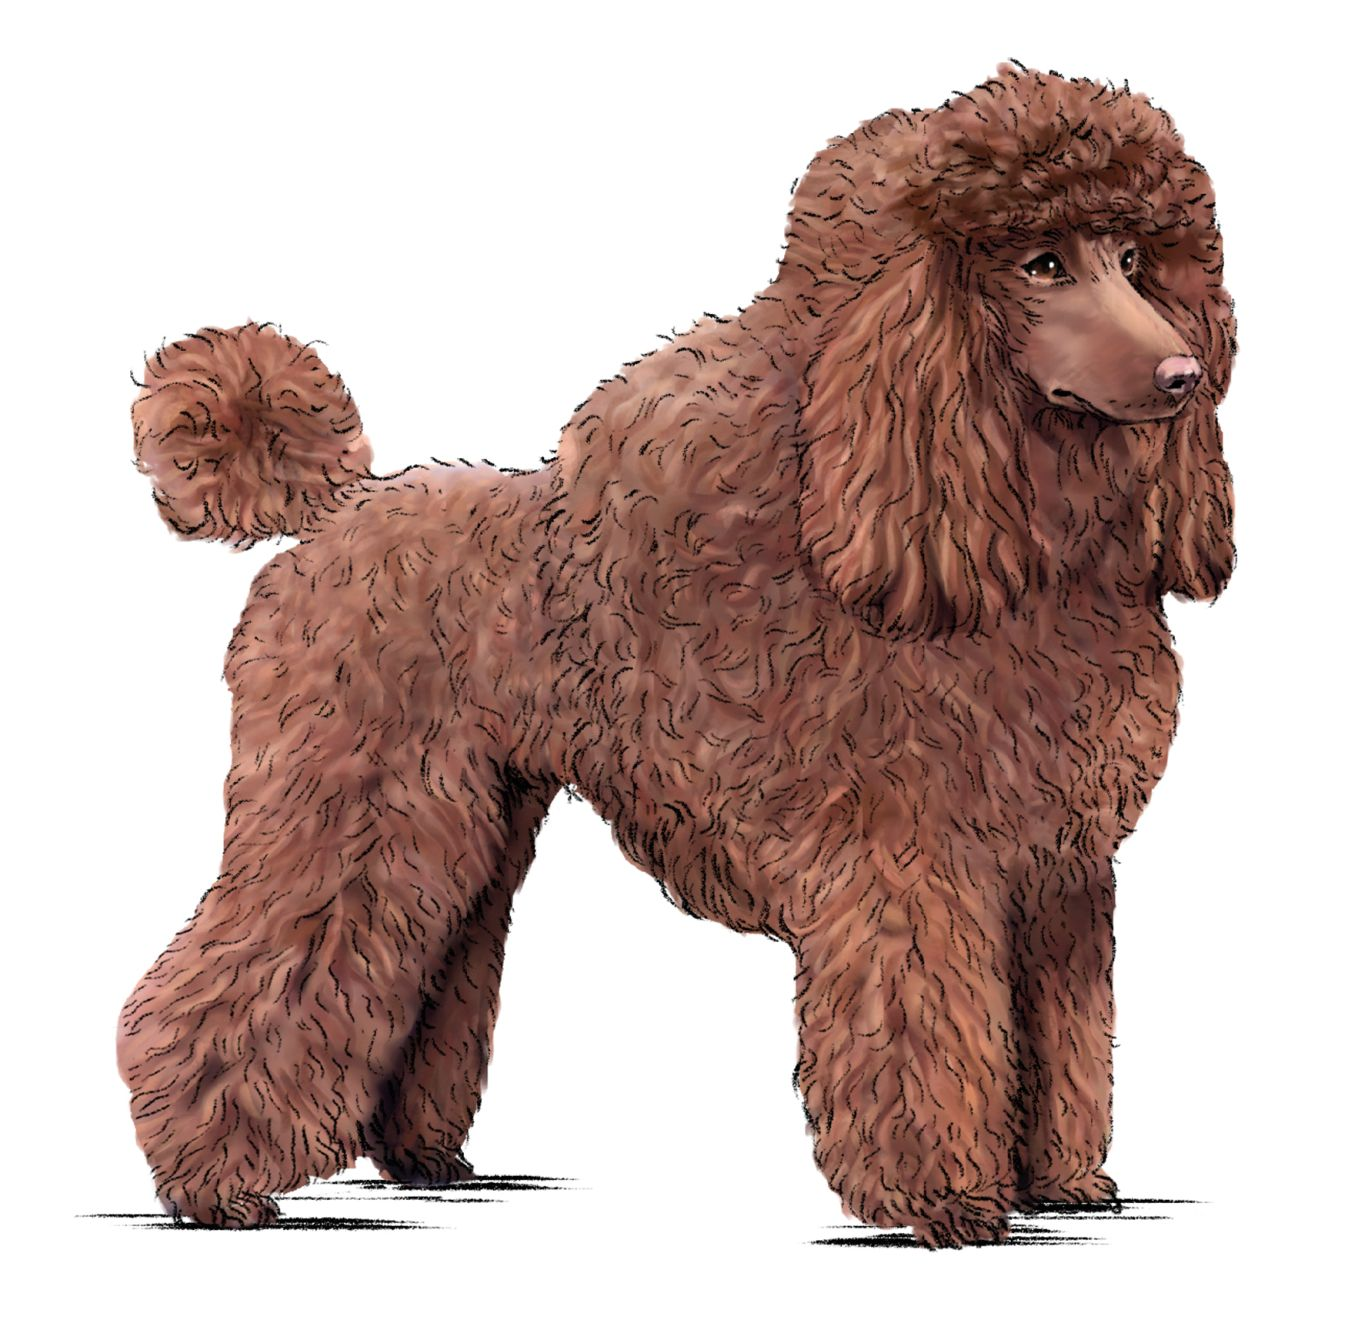 Illustration of a standing brown Poodle